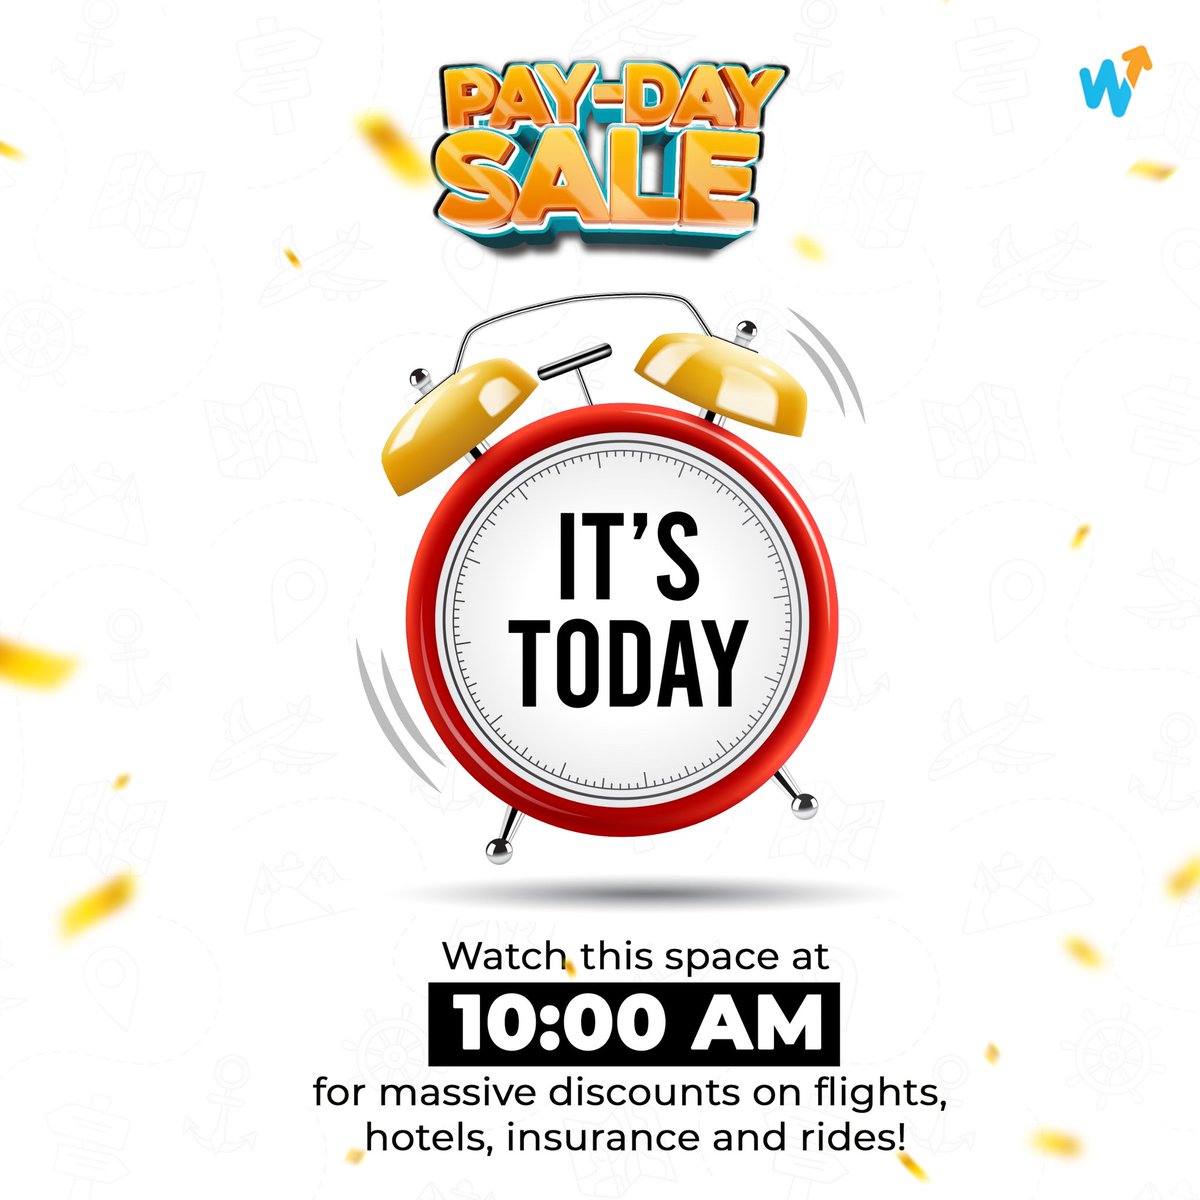 Are you ready???
Watch this space at 10 am

#WakanowGhana #LetsGo #MassiveDiscounts #Hotels #Rides #Insurance #Flights #PayDaySales